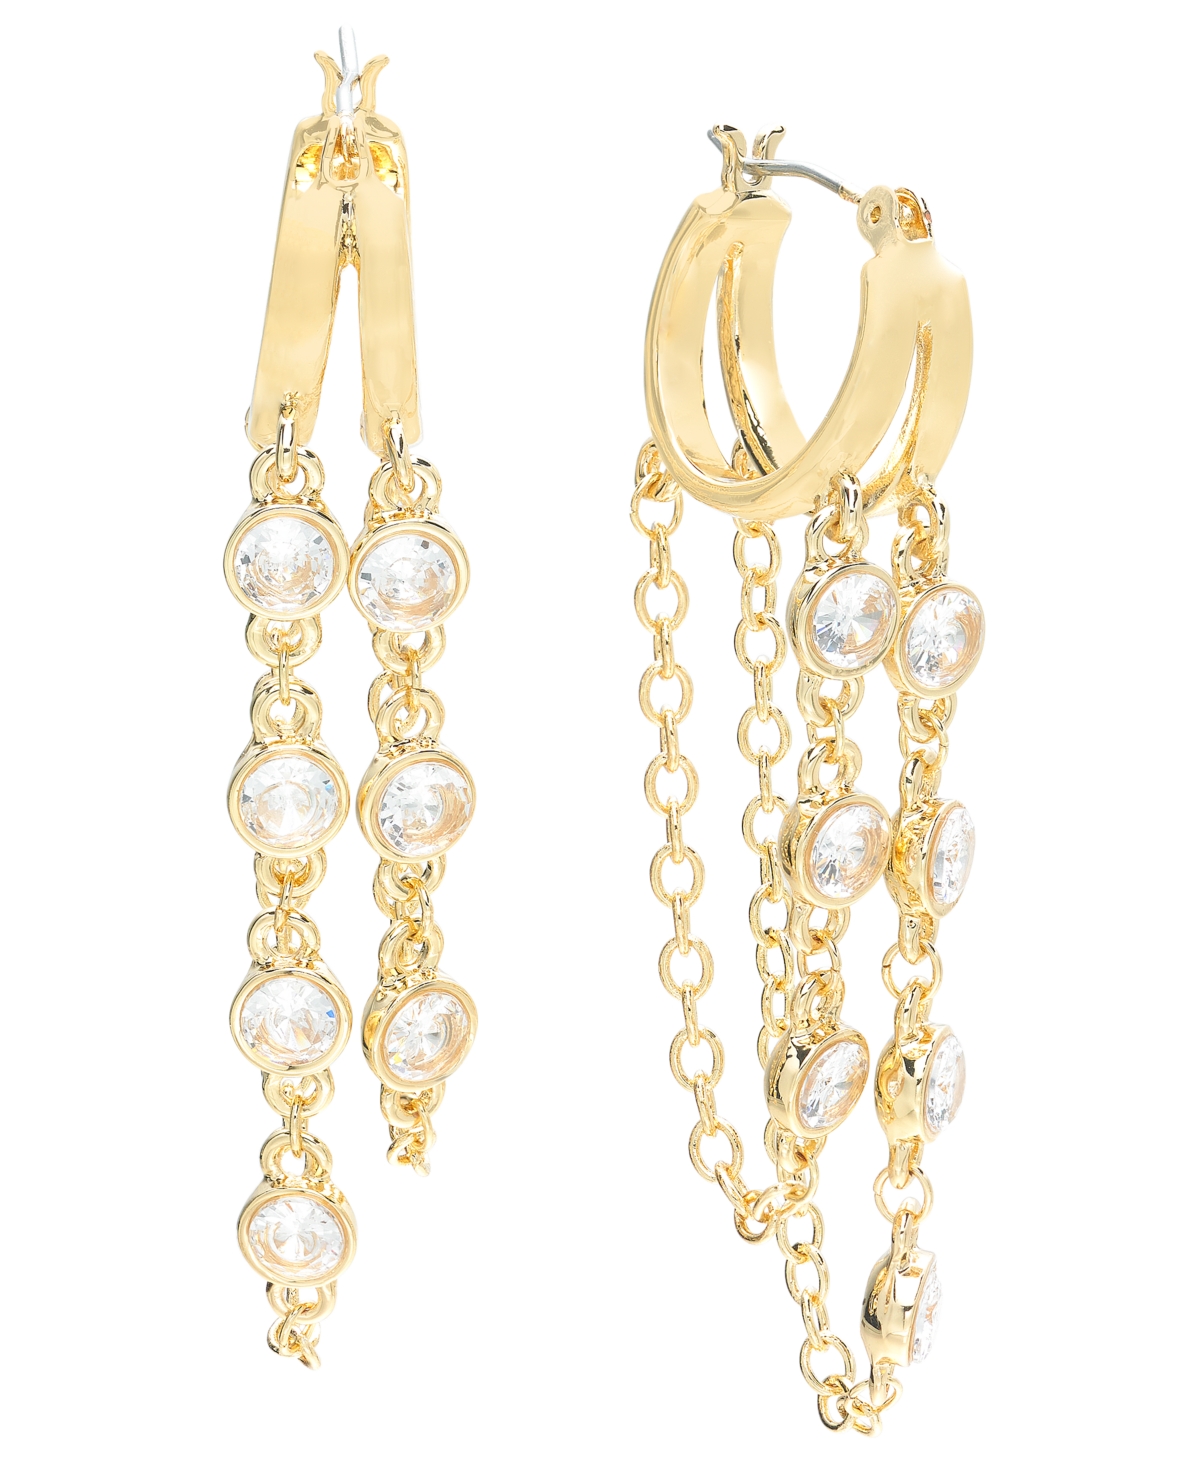 Chain Cubic Zirconia Drop Earrings, Created for Macy's - Gold